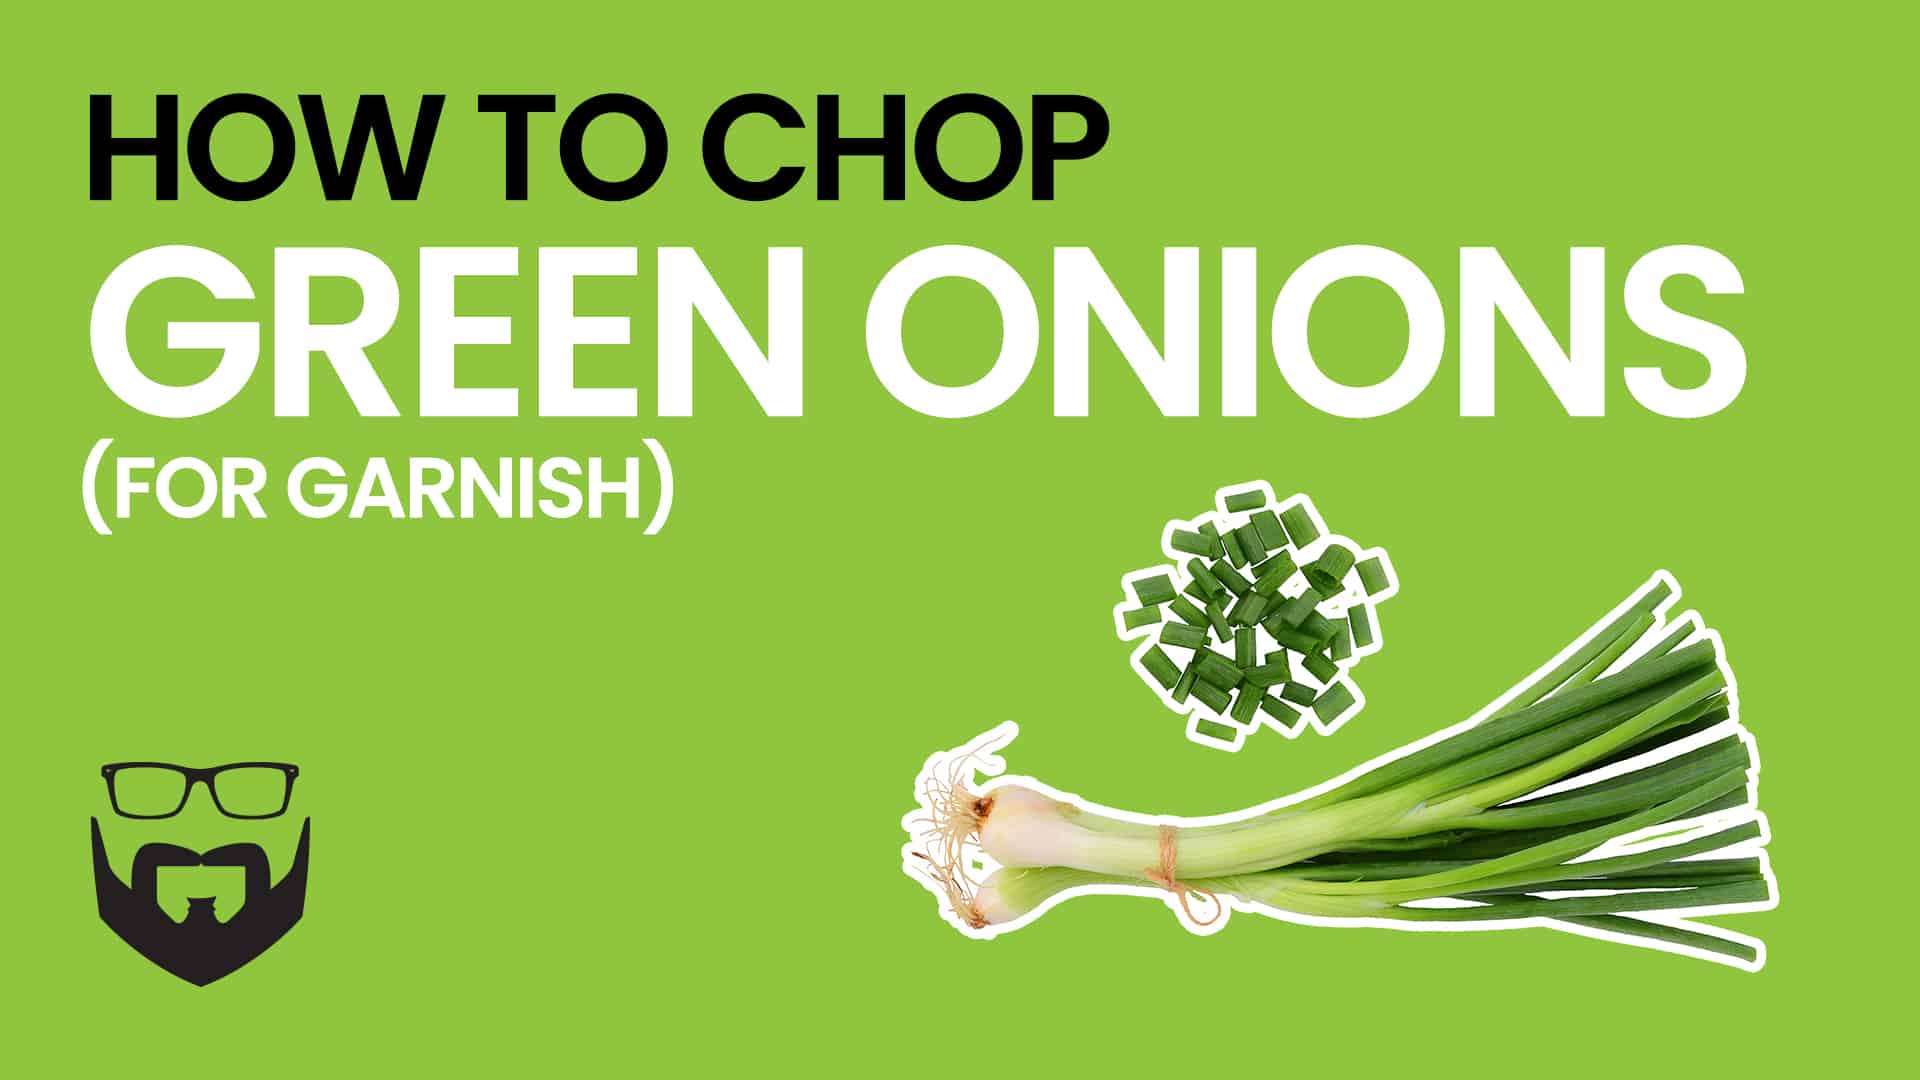 How to Chop Green Onions for Garnish Video - Green